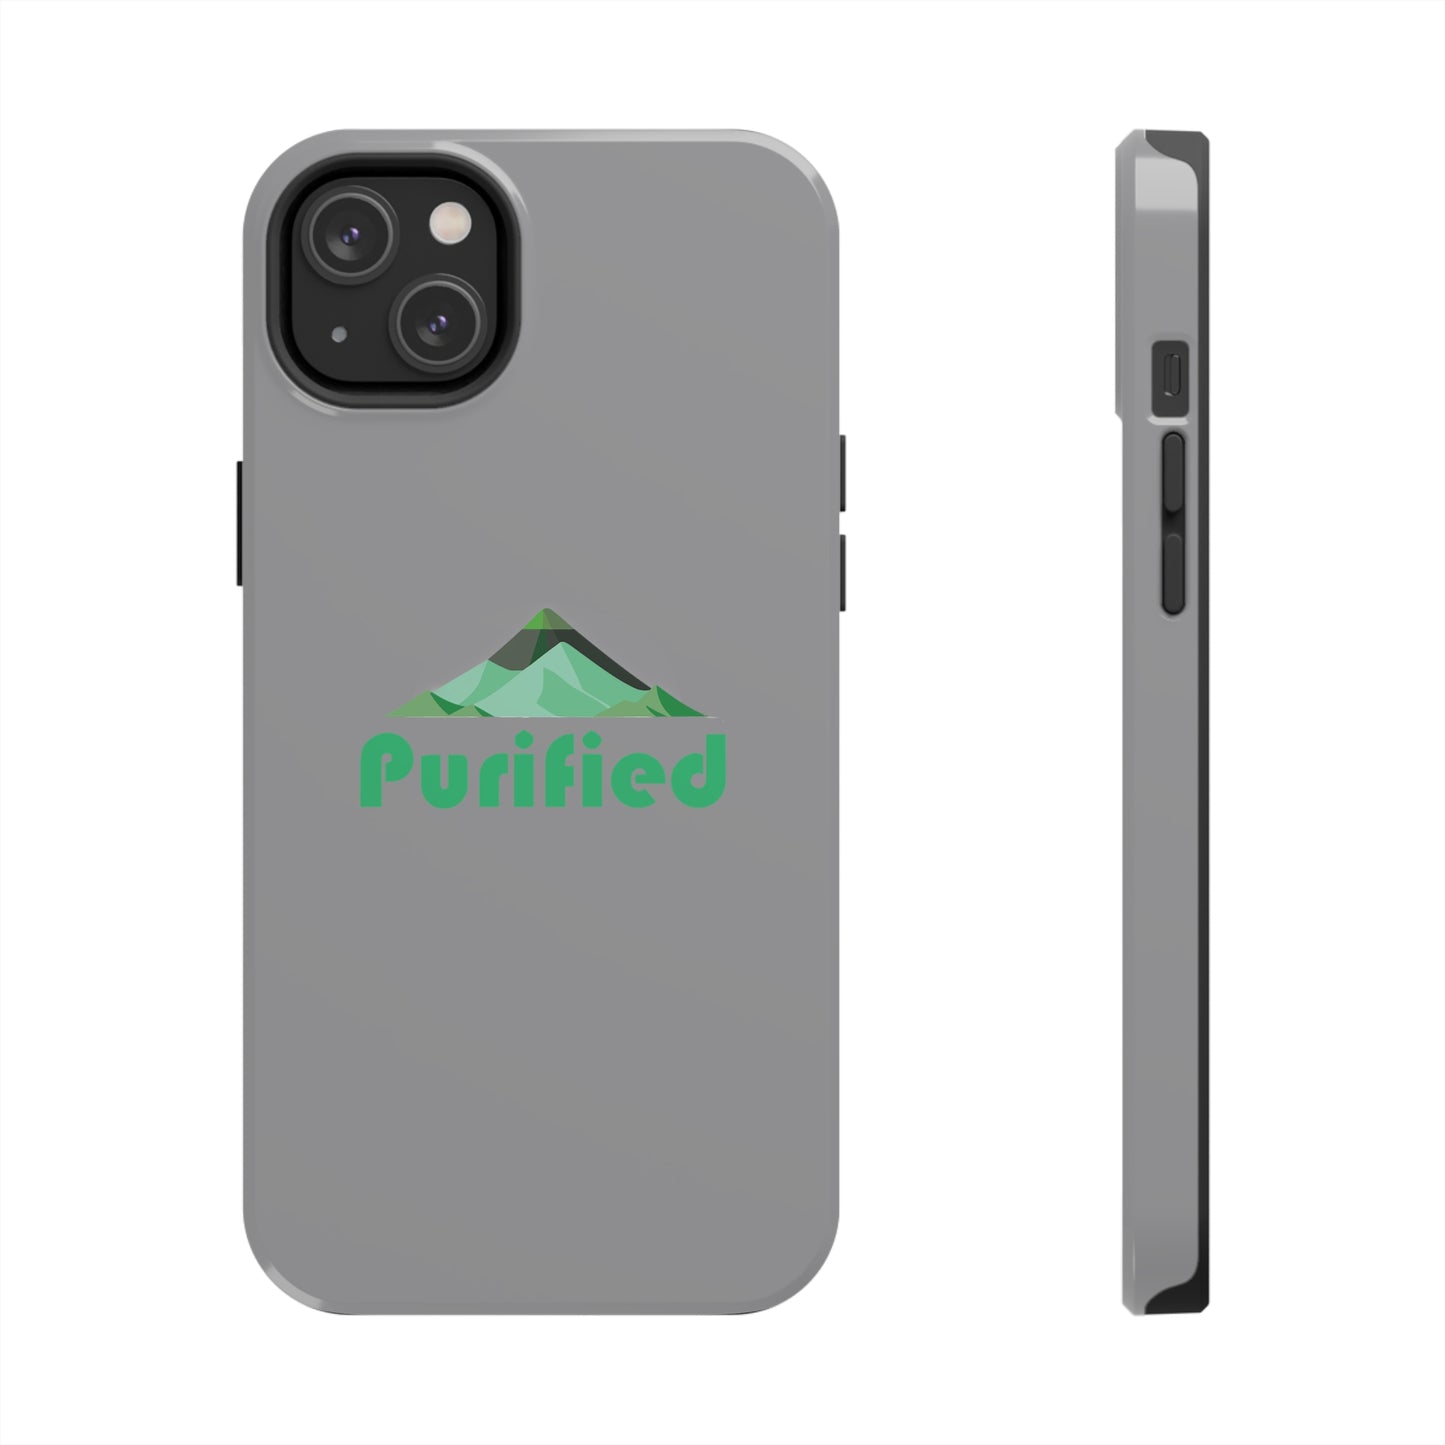 Purified Elevate Gray Phone Cases